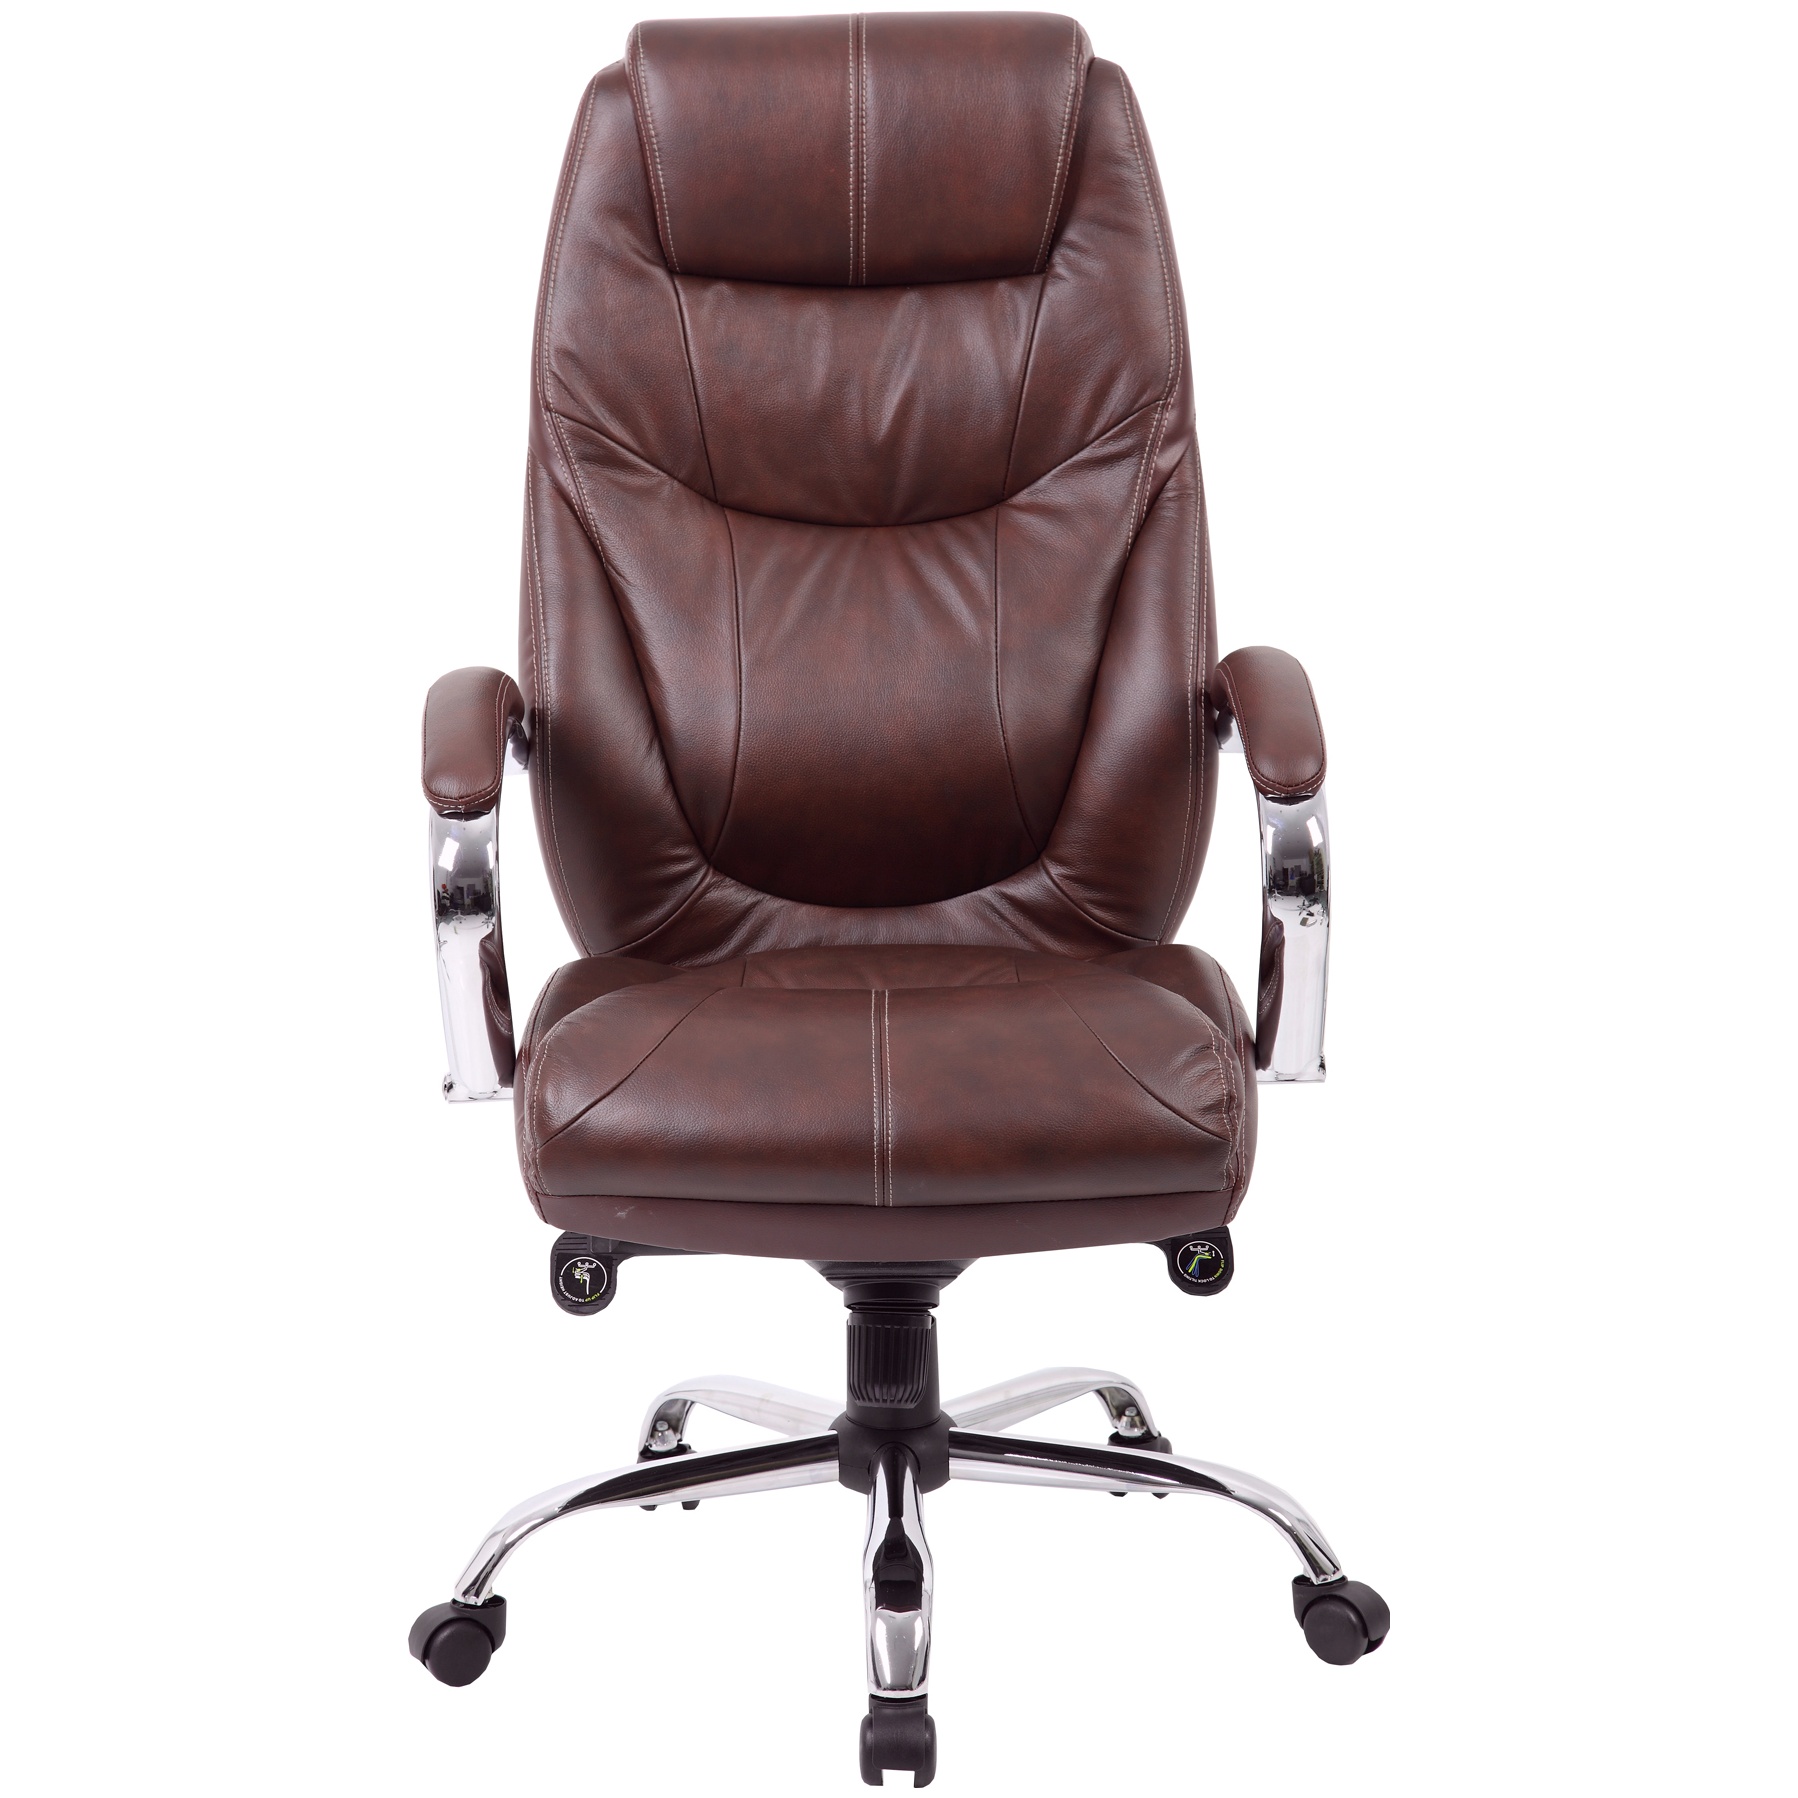 Genoa Top Leather Executive Office Chair Brown